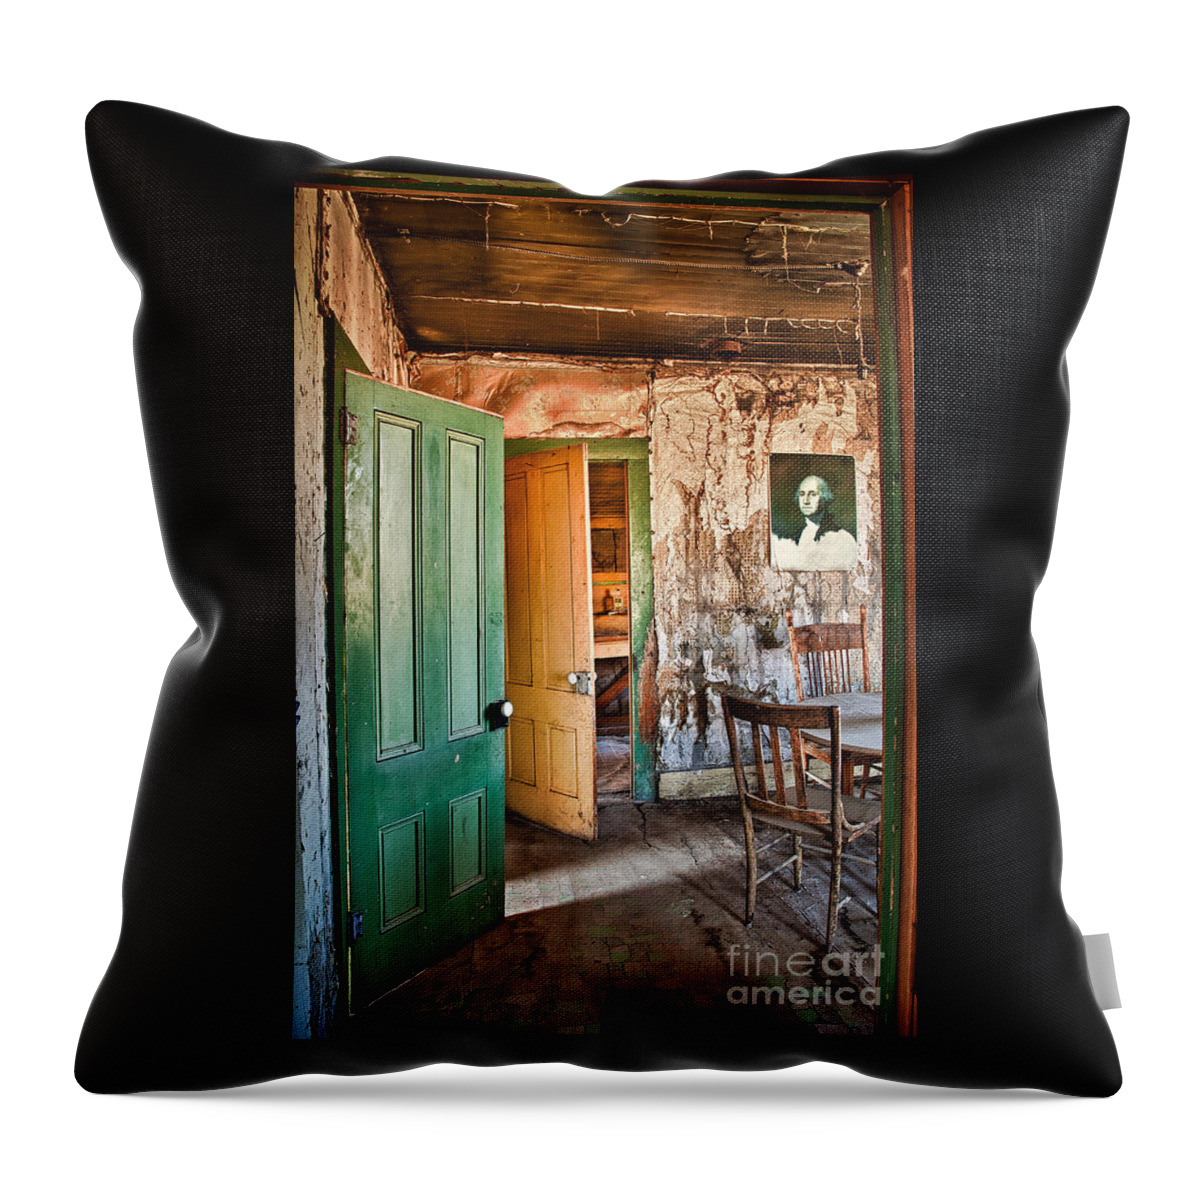 Bodie Throw Pillow featuring the photograph Bodie Doors by Alice Cahill